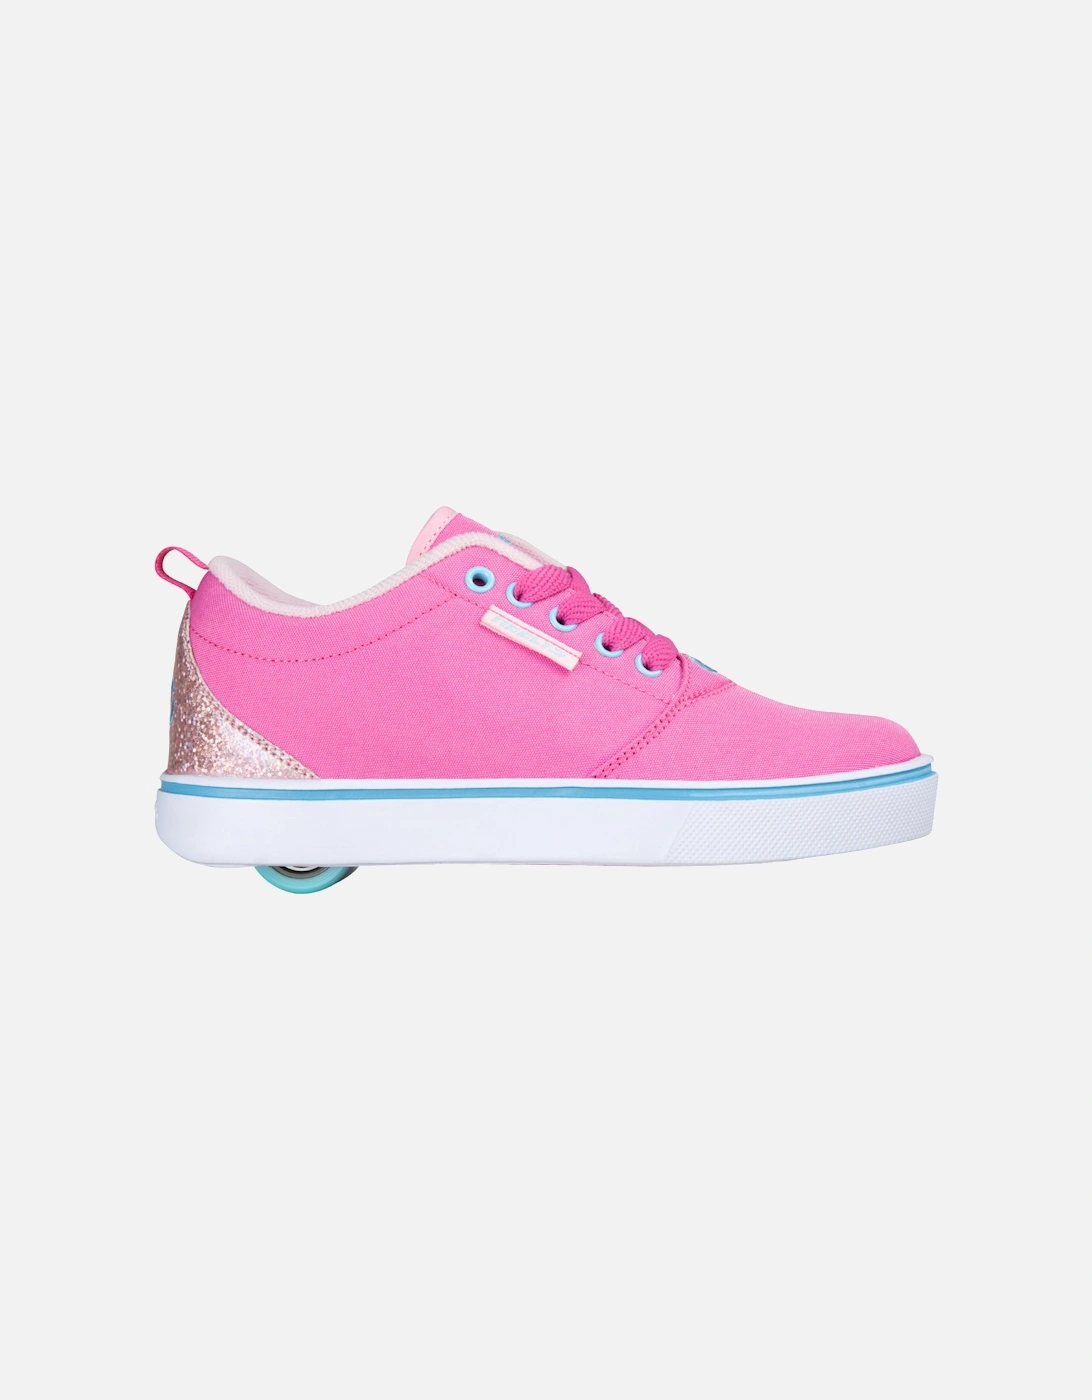 Girls Trainers Pro 20 Canvas Lace Up Skate Shoes Wheels Pink UK Size, 4 of 3